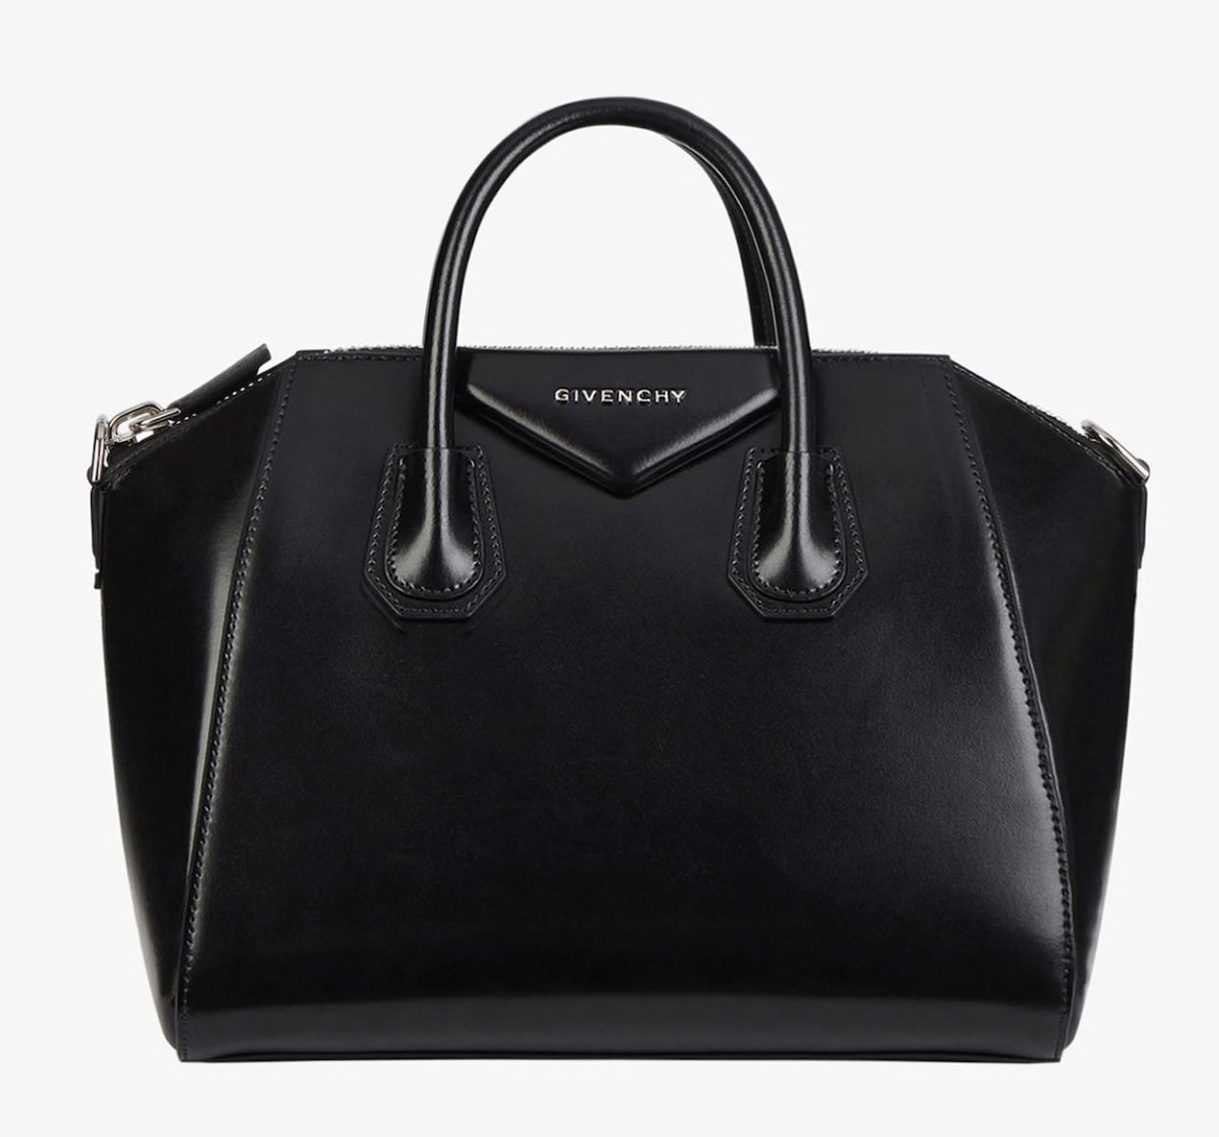 Best designer tote bags for work and life: Givenchy Antigona Medium Leather Tote